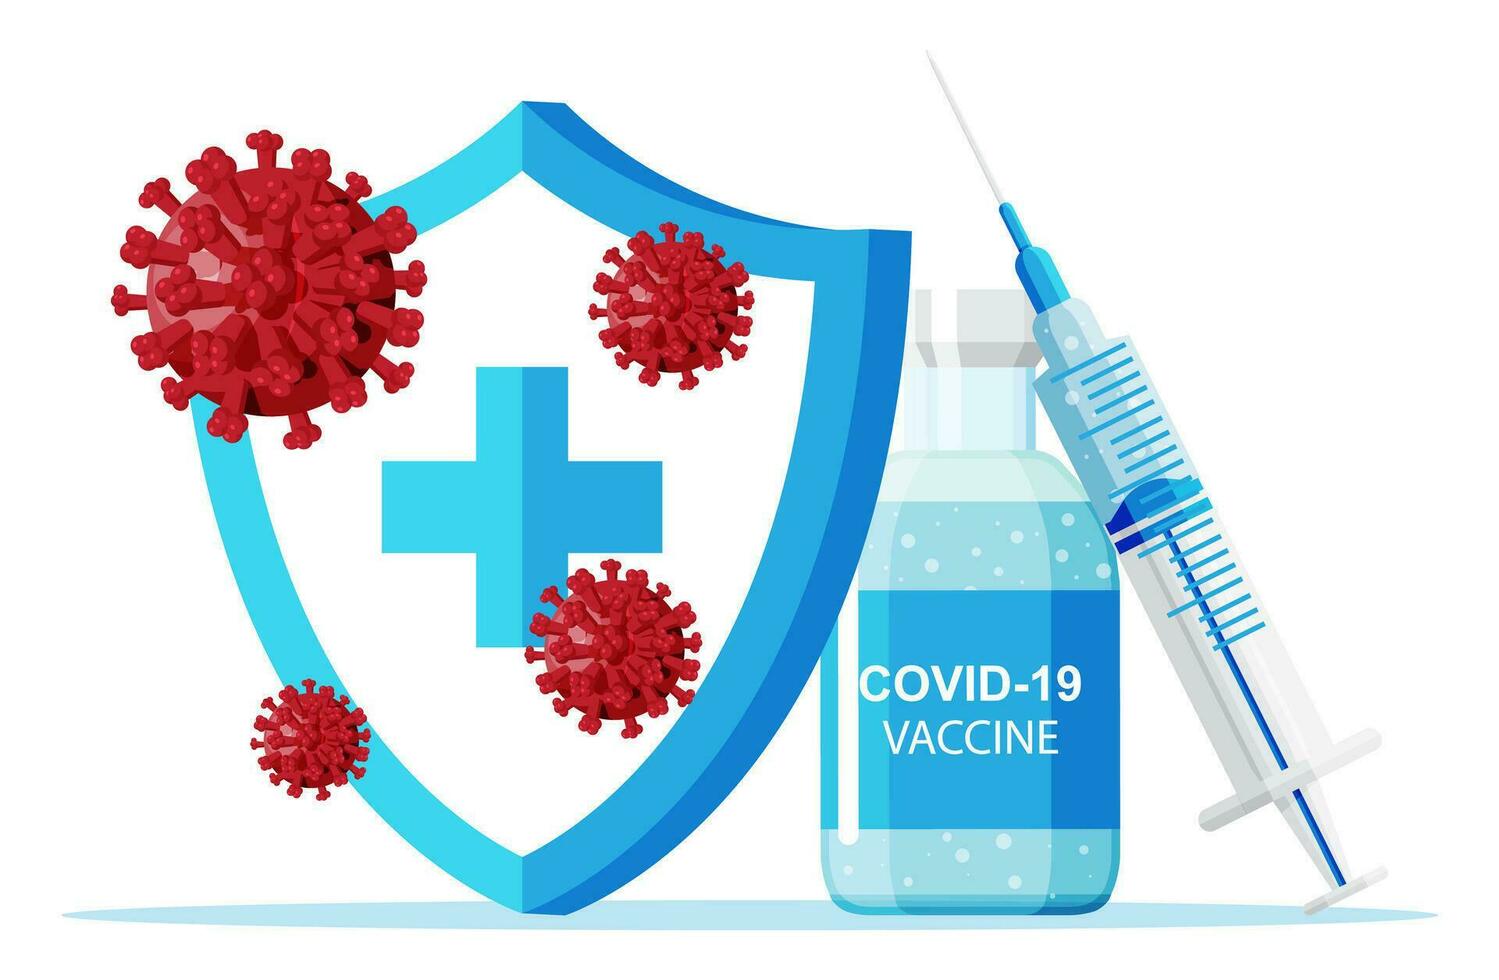 Vaccination against coronavirus. Time to vaccinate, concept. Medical syringe injection vaccination. Shield protect against corona virus, cell models, Health care. Flat vector illustration